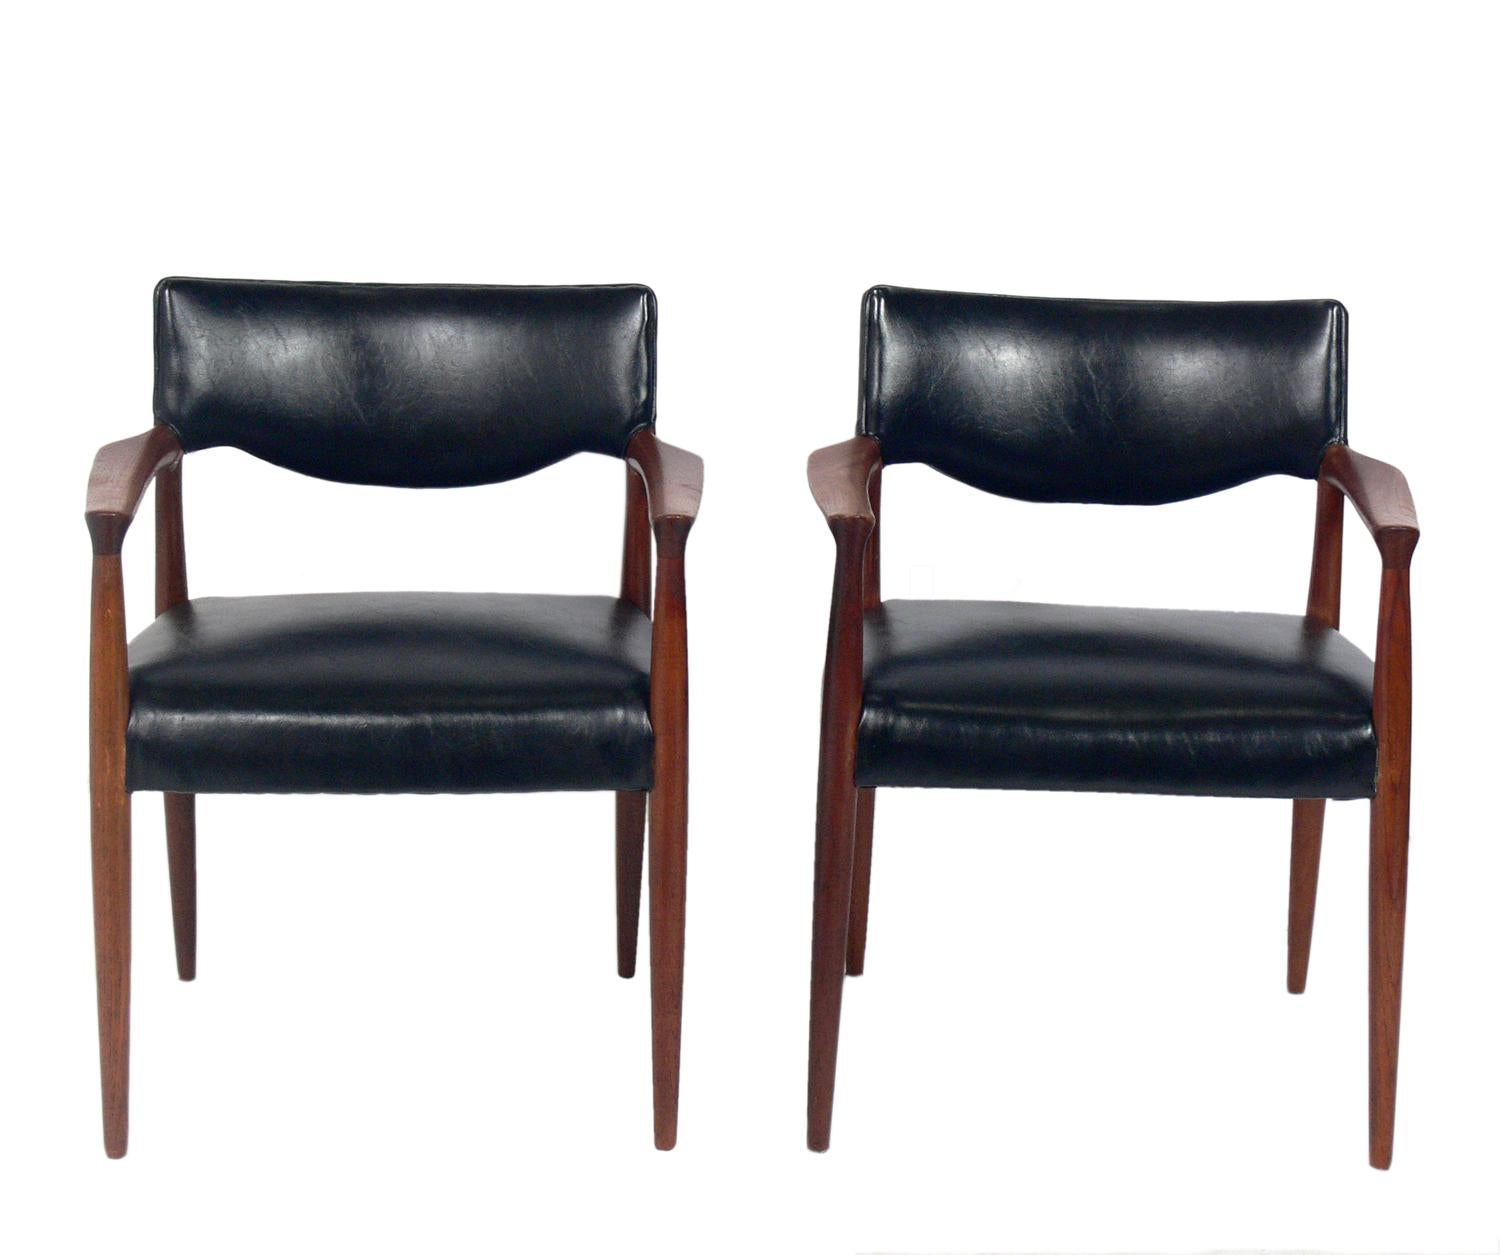 Mid-Century Modern Pair of Danish Modern Chairs For Sale